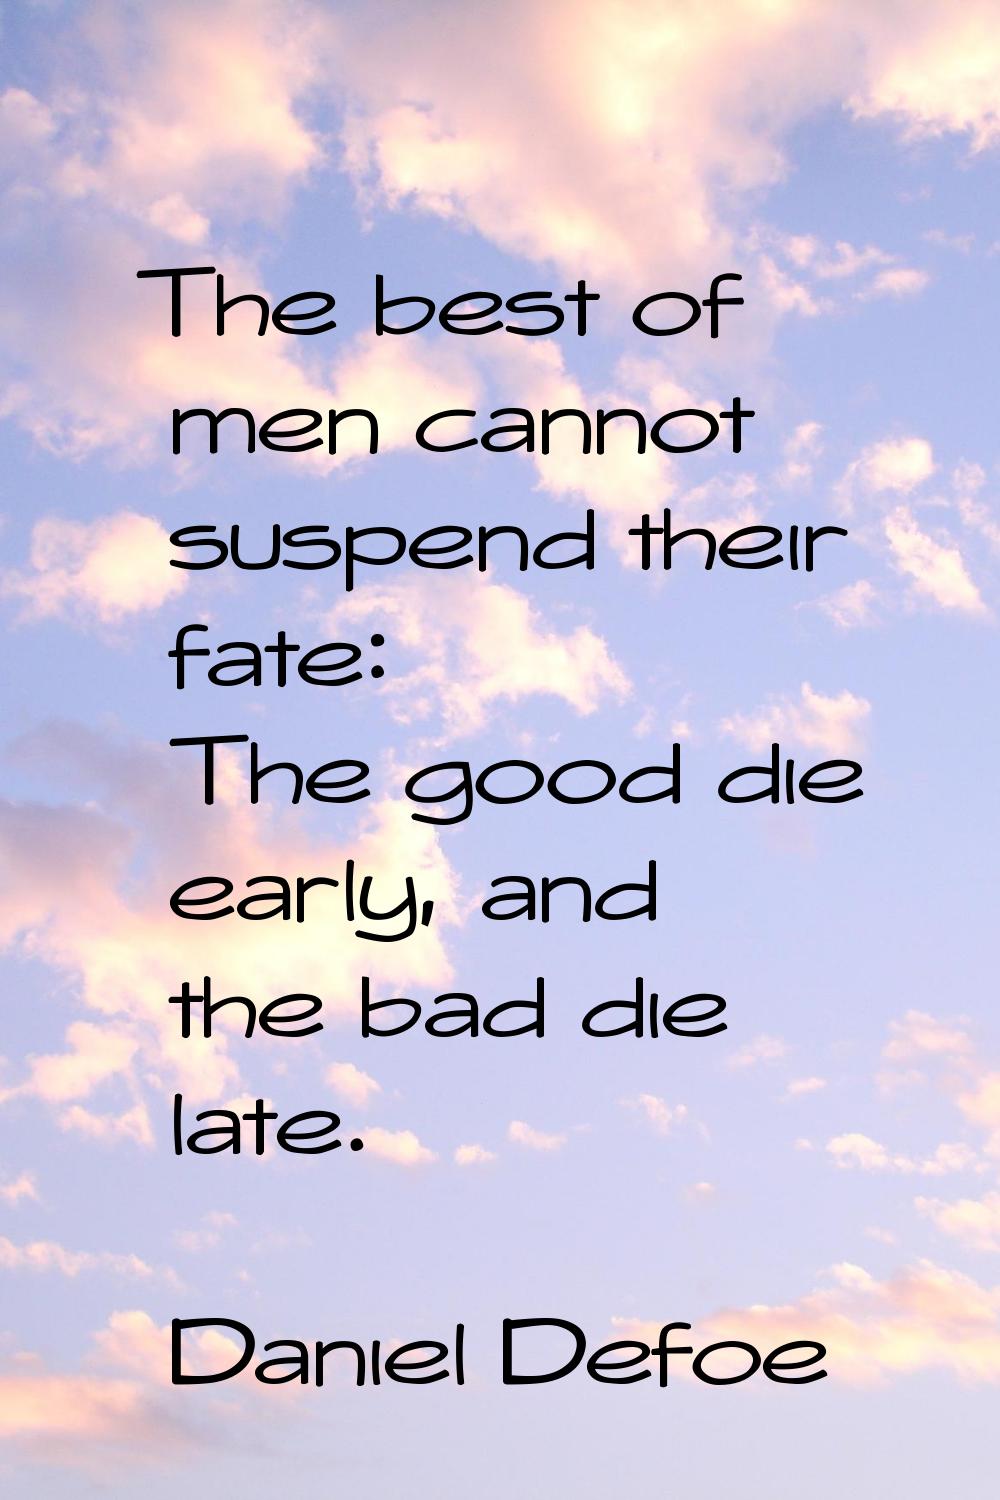 The best of men cannot suspend their fate: The good die early, and the bad die late.